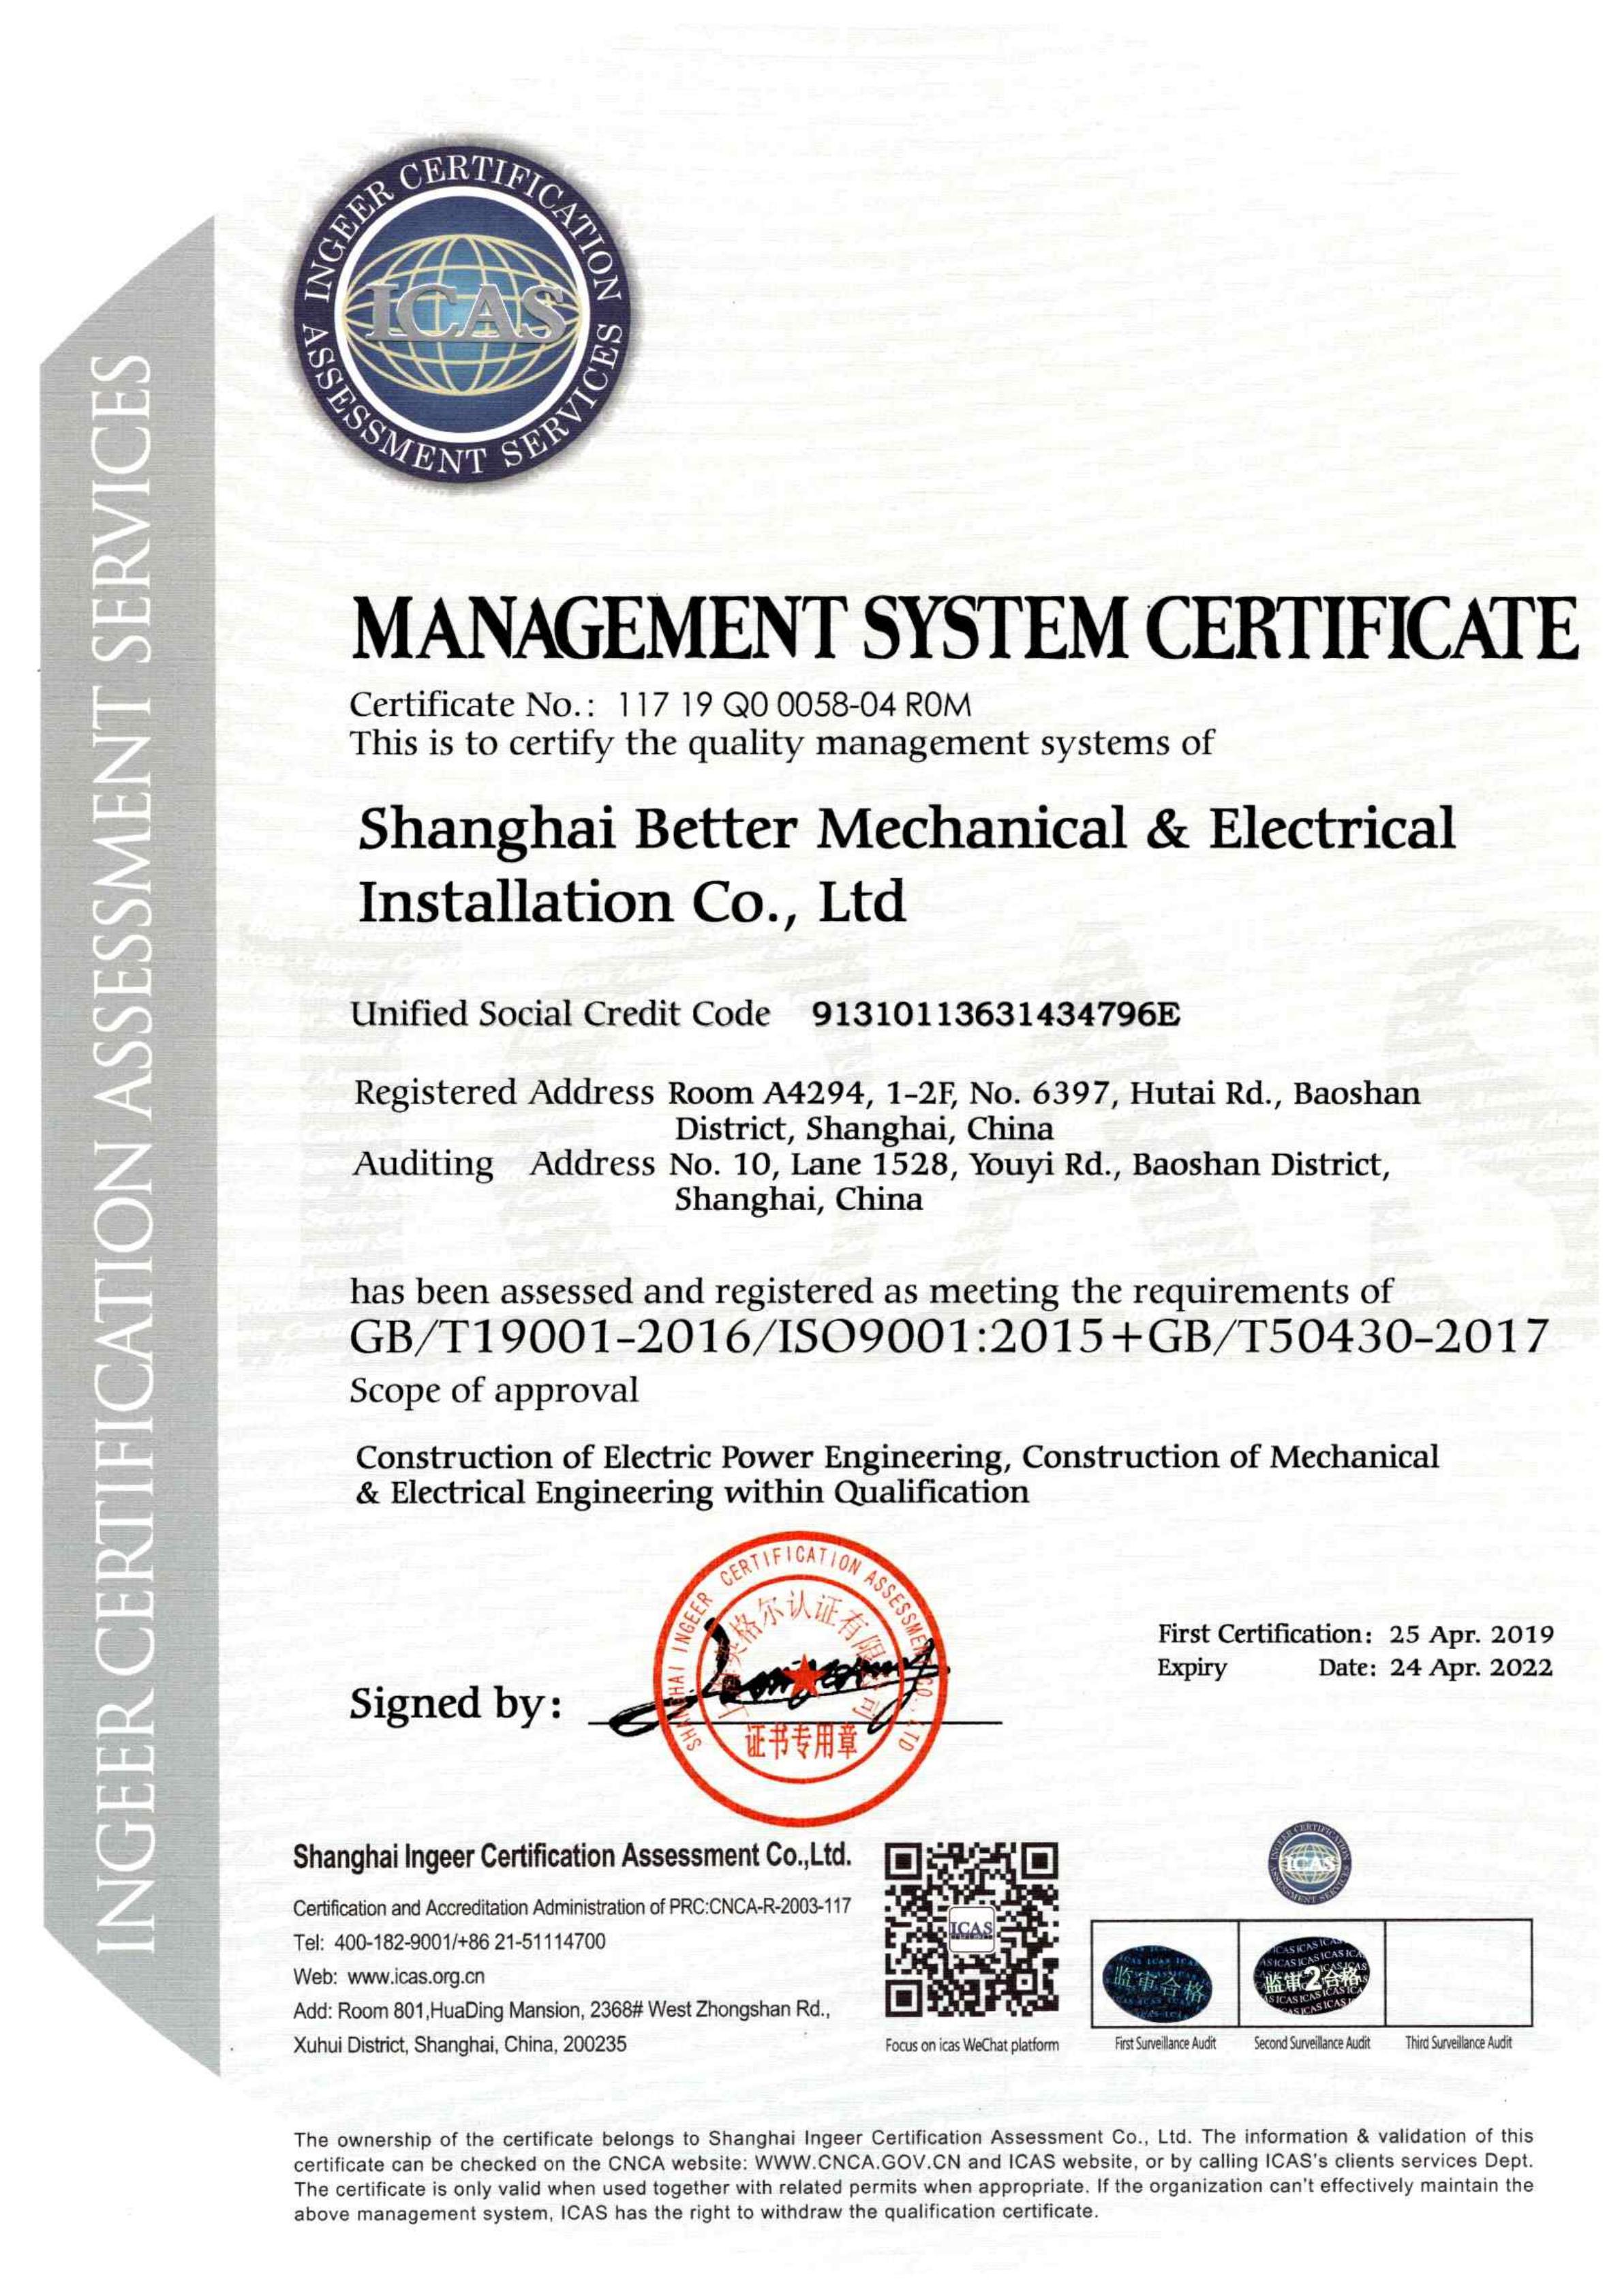 Management System Certificate - Engineering Construction